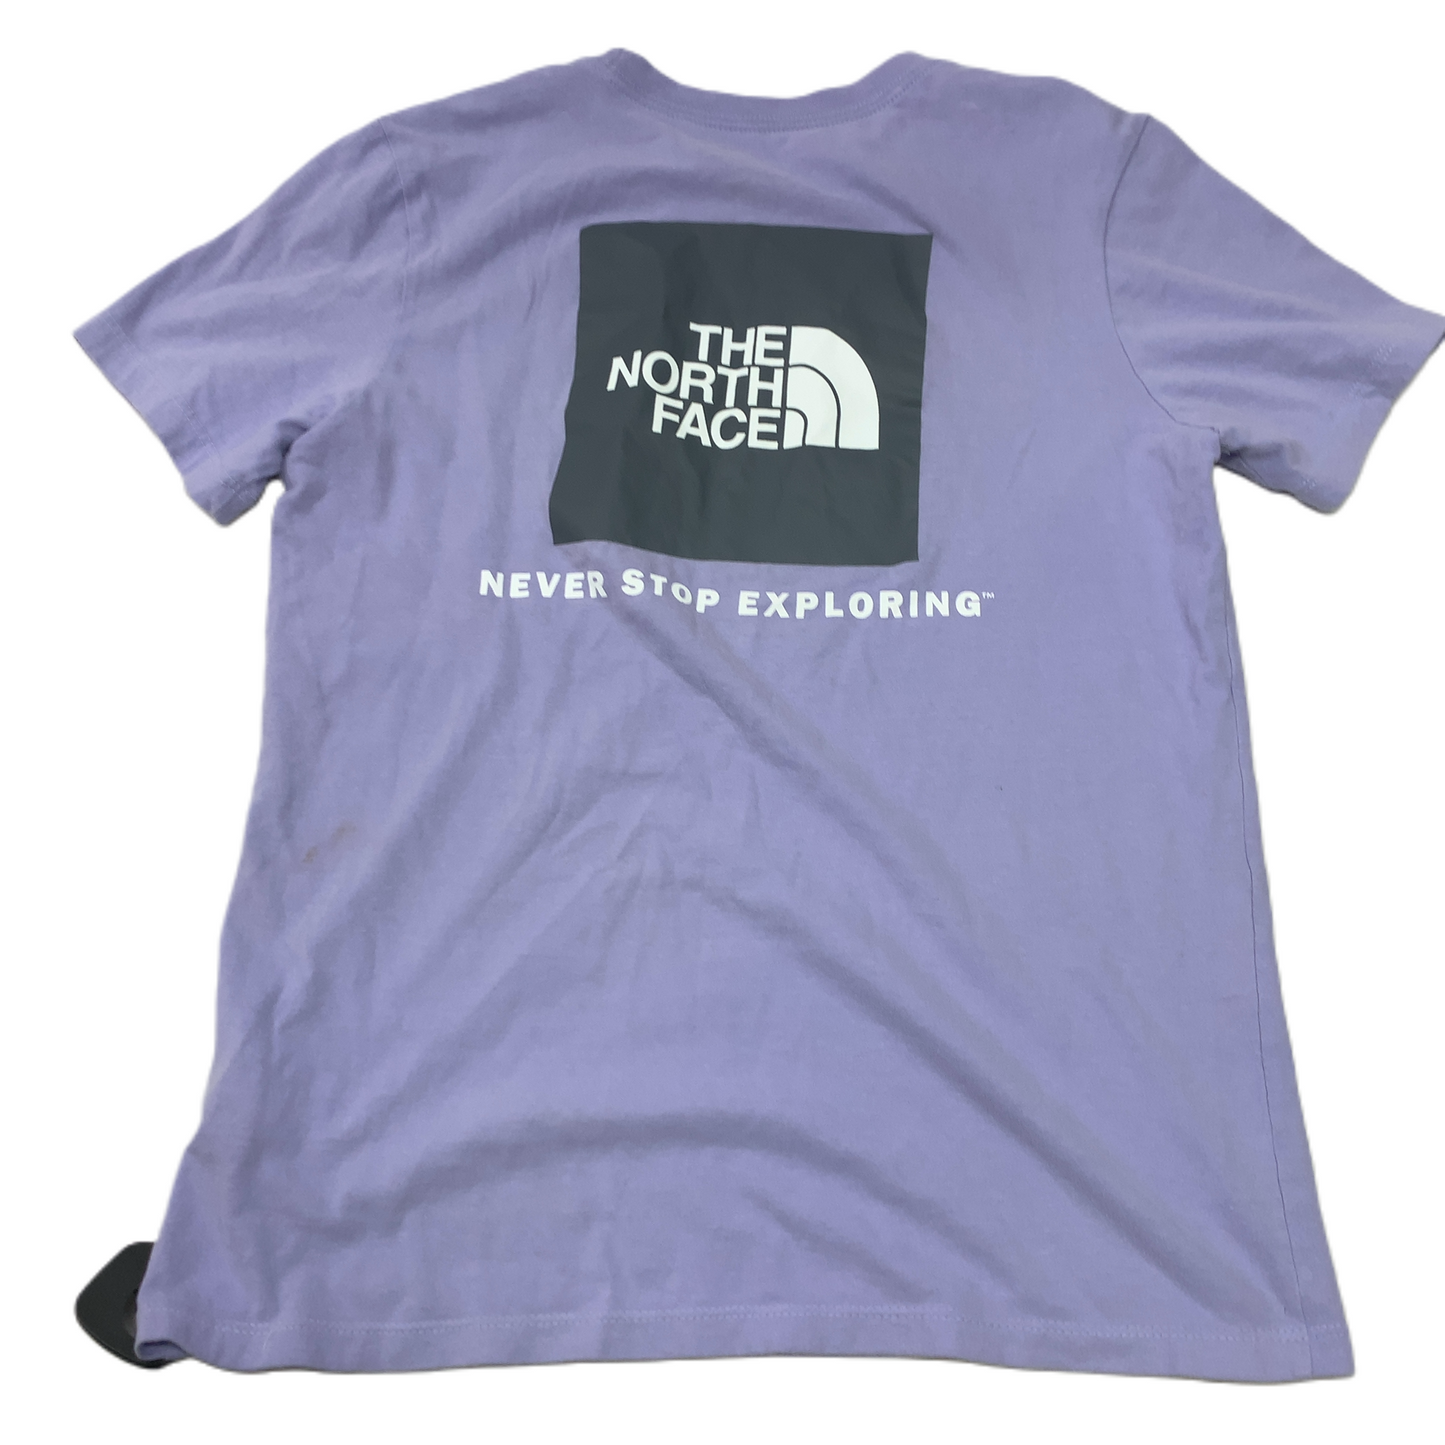 Athletic Top Short Sleeve By North Face  Size: Xs